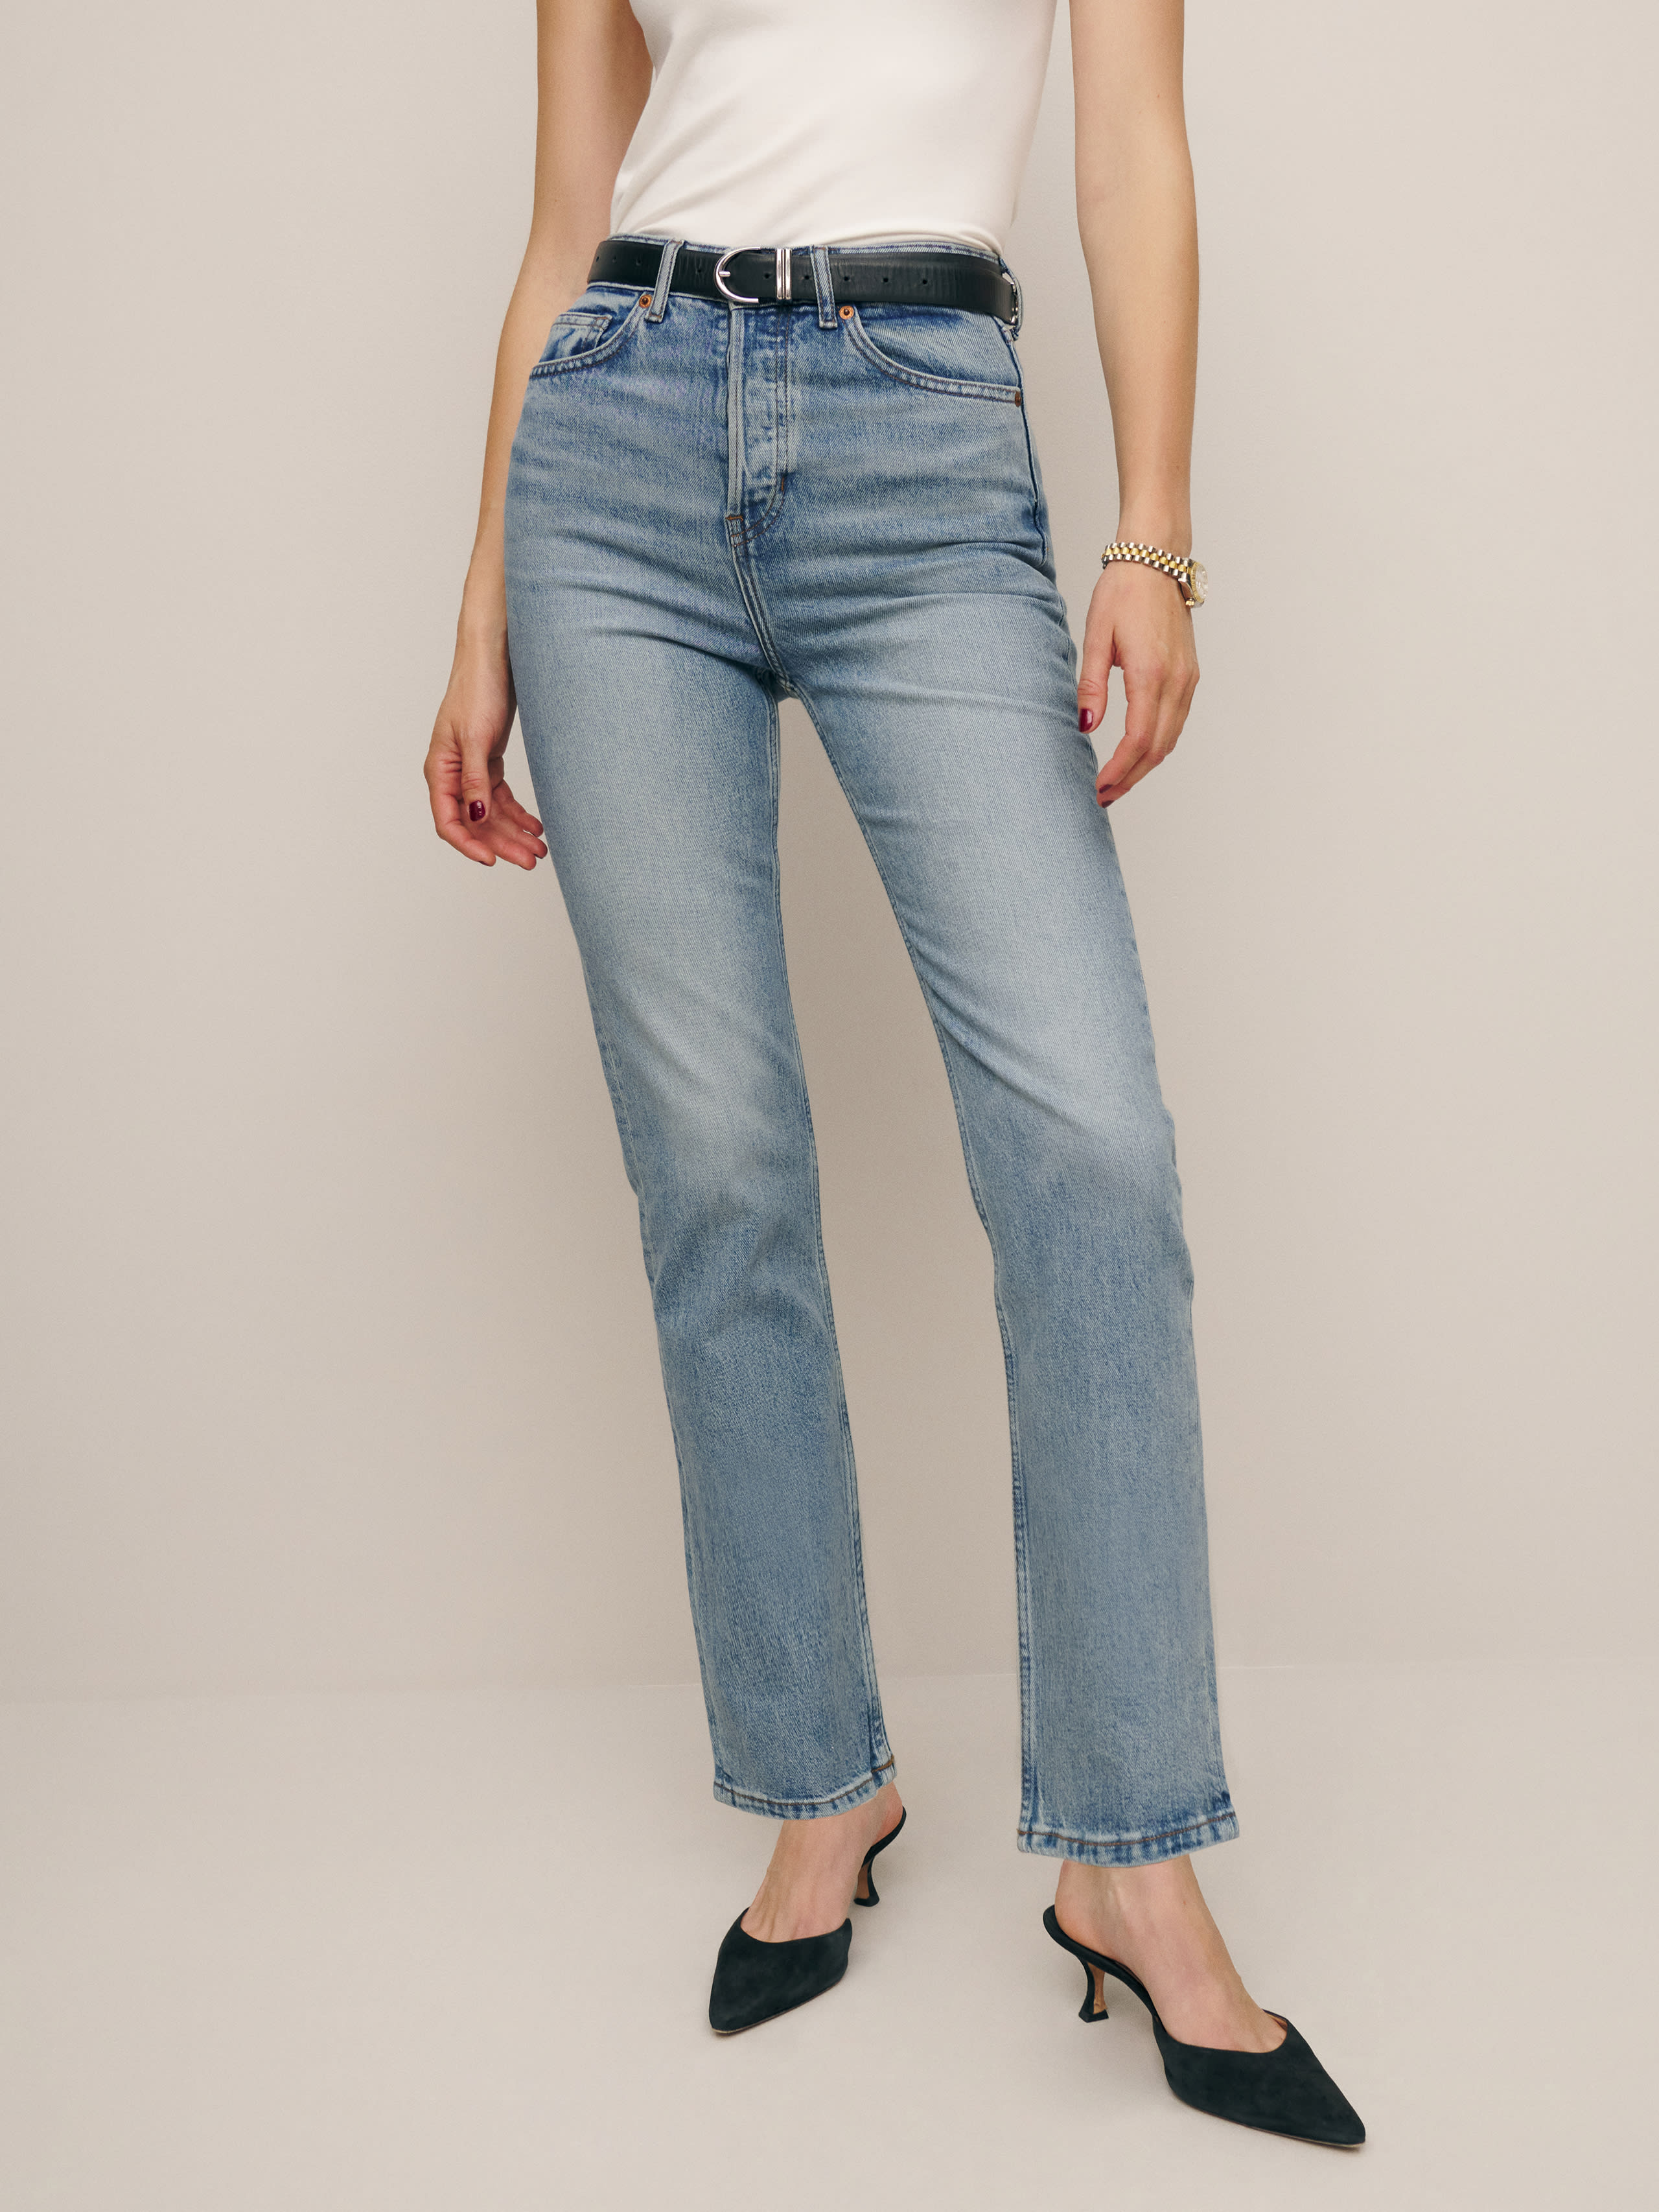 Reformation Cynthia Stretch High Rise Straight Jeans In Fortuna